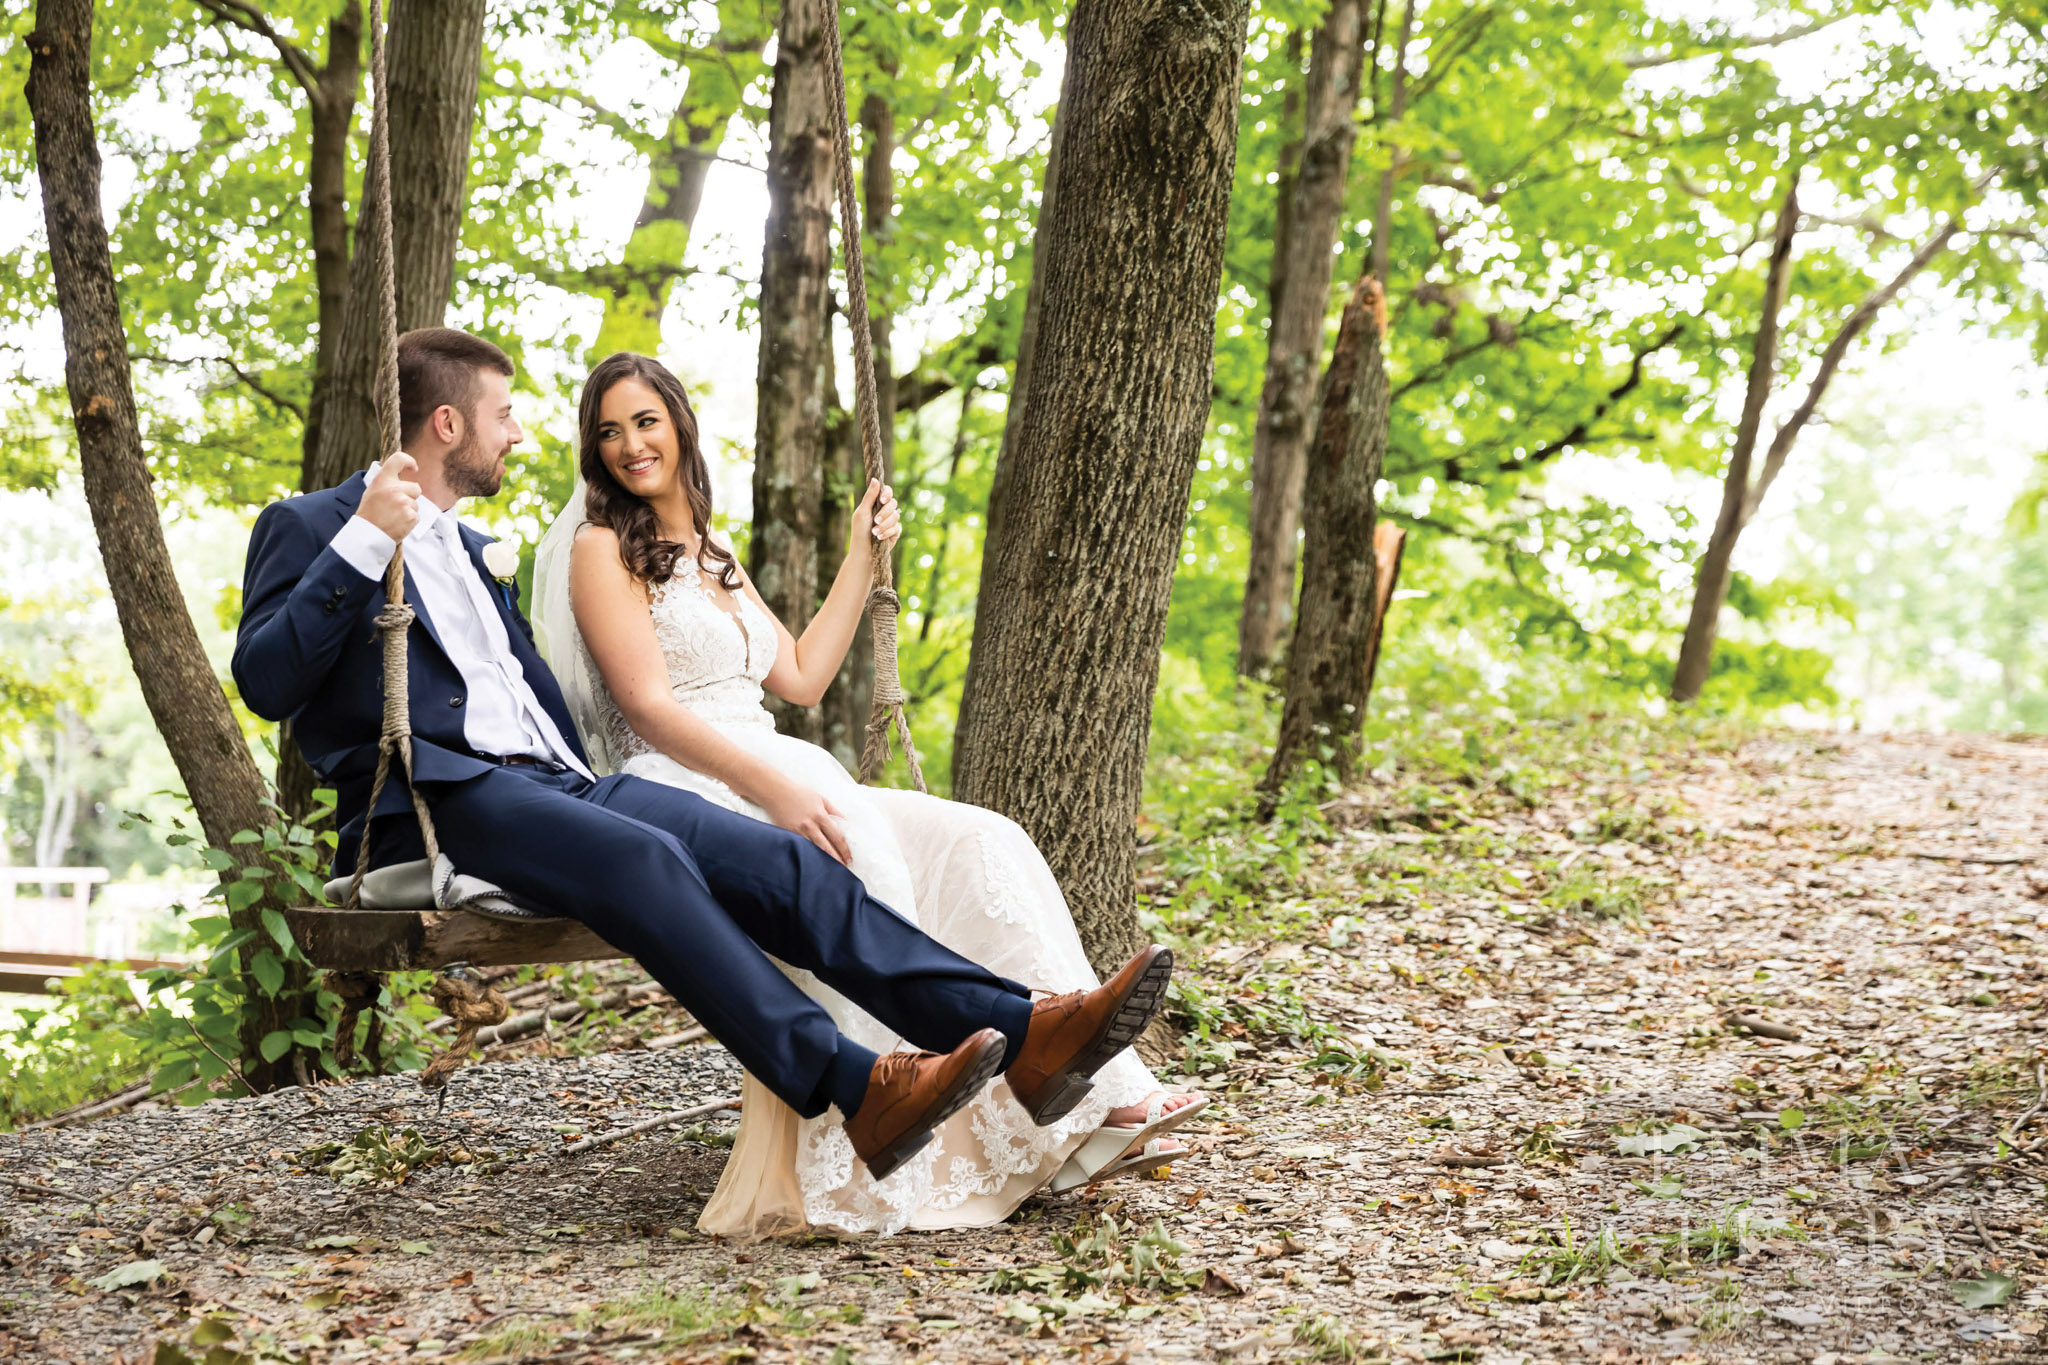 The bride and groom on a swing